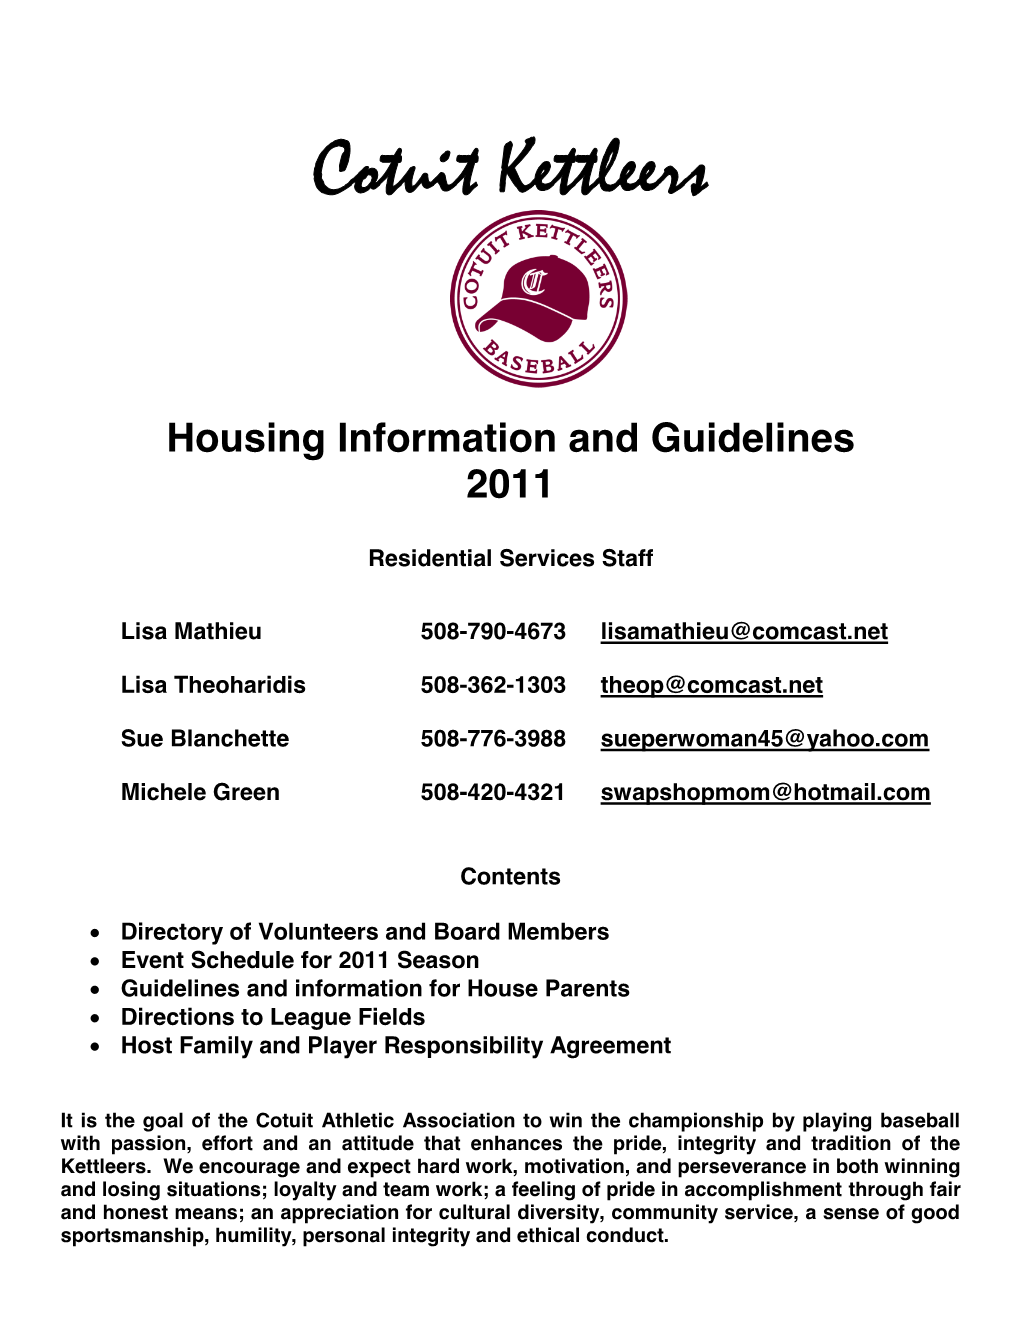 Housing Information and Guidelines 2011